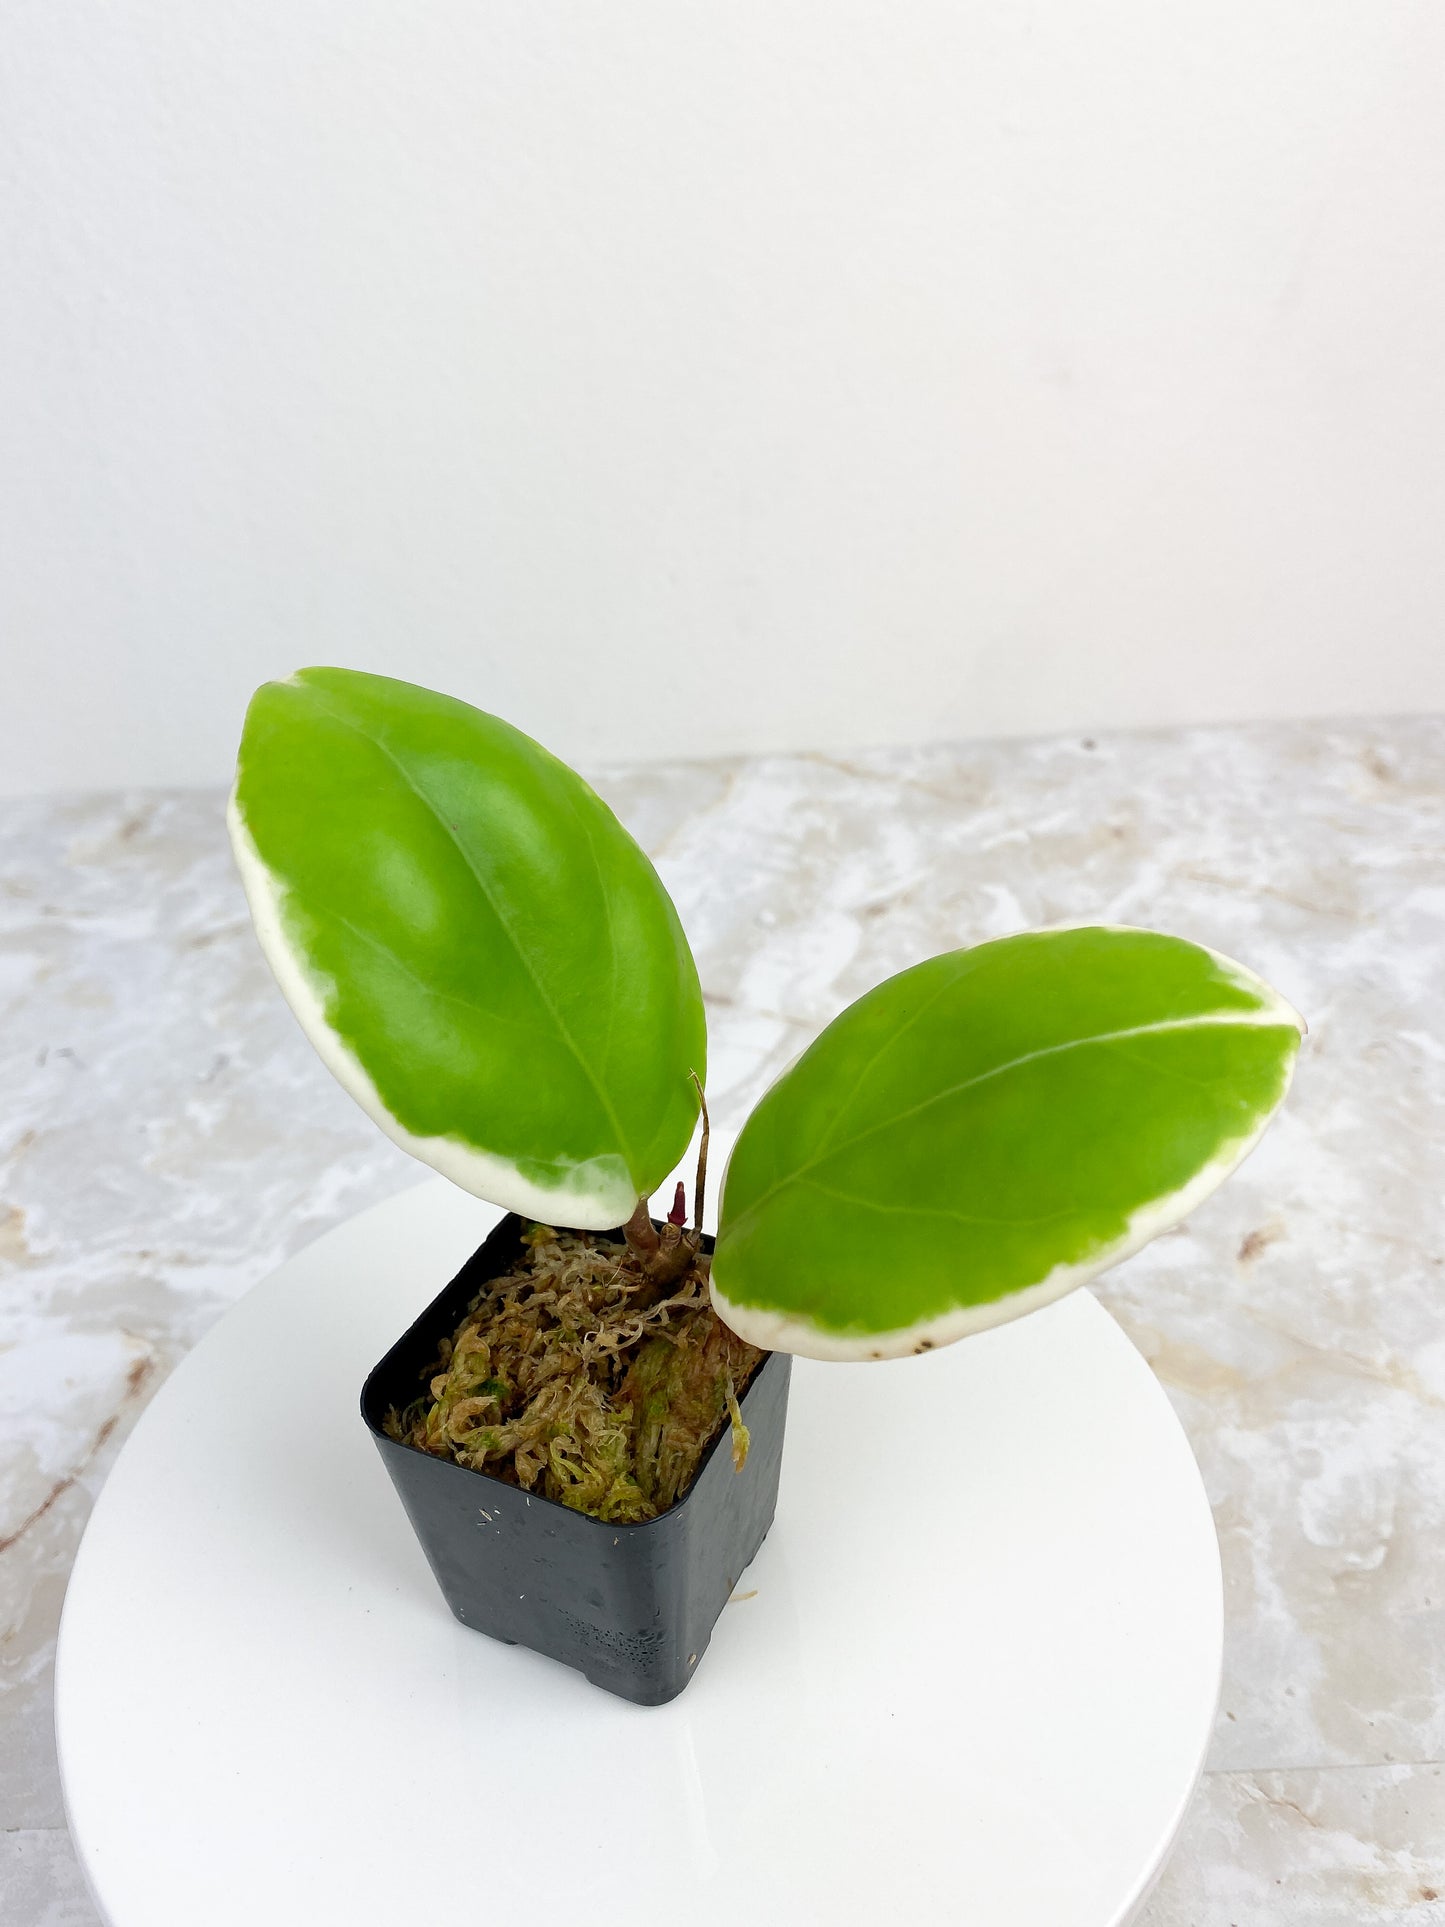 Private sale: Hoya pachyclada variegated 2 leaves and 2 baby leaves FREE 1 Global green and 1 silver lady